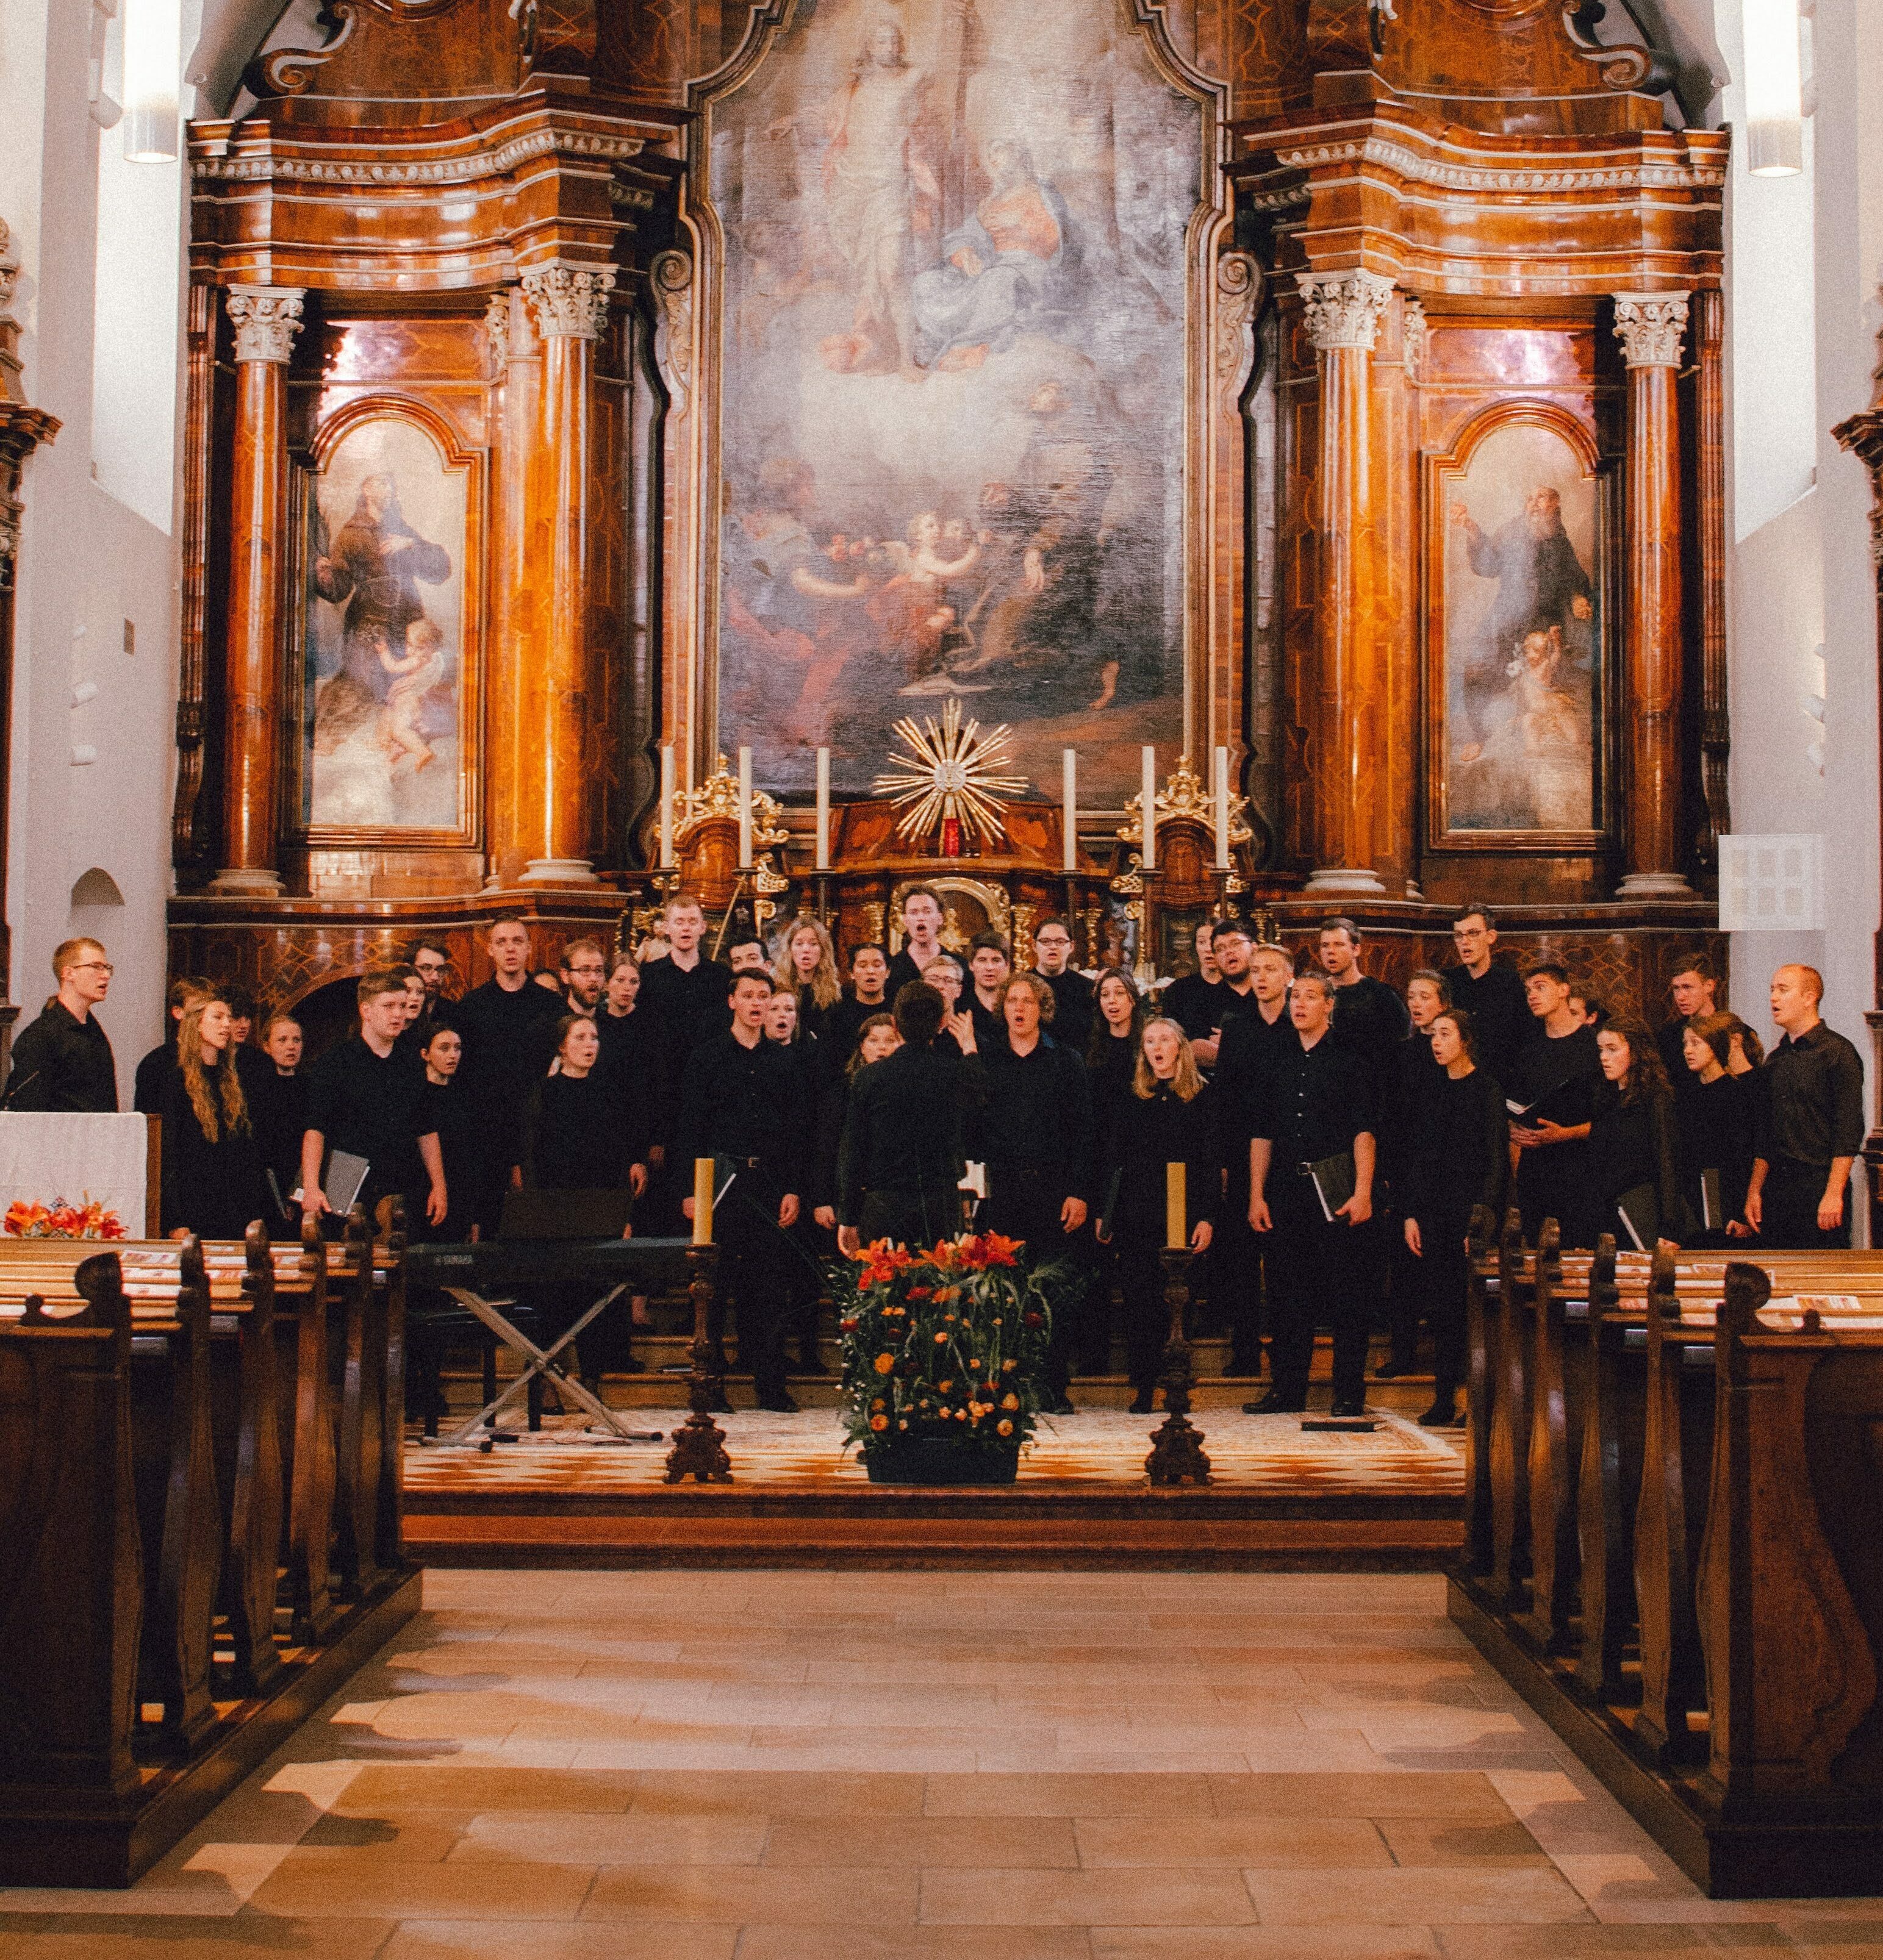 The Concert Choir performing at a church in Europe